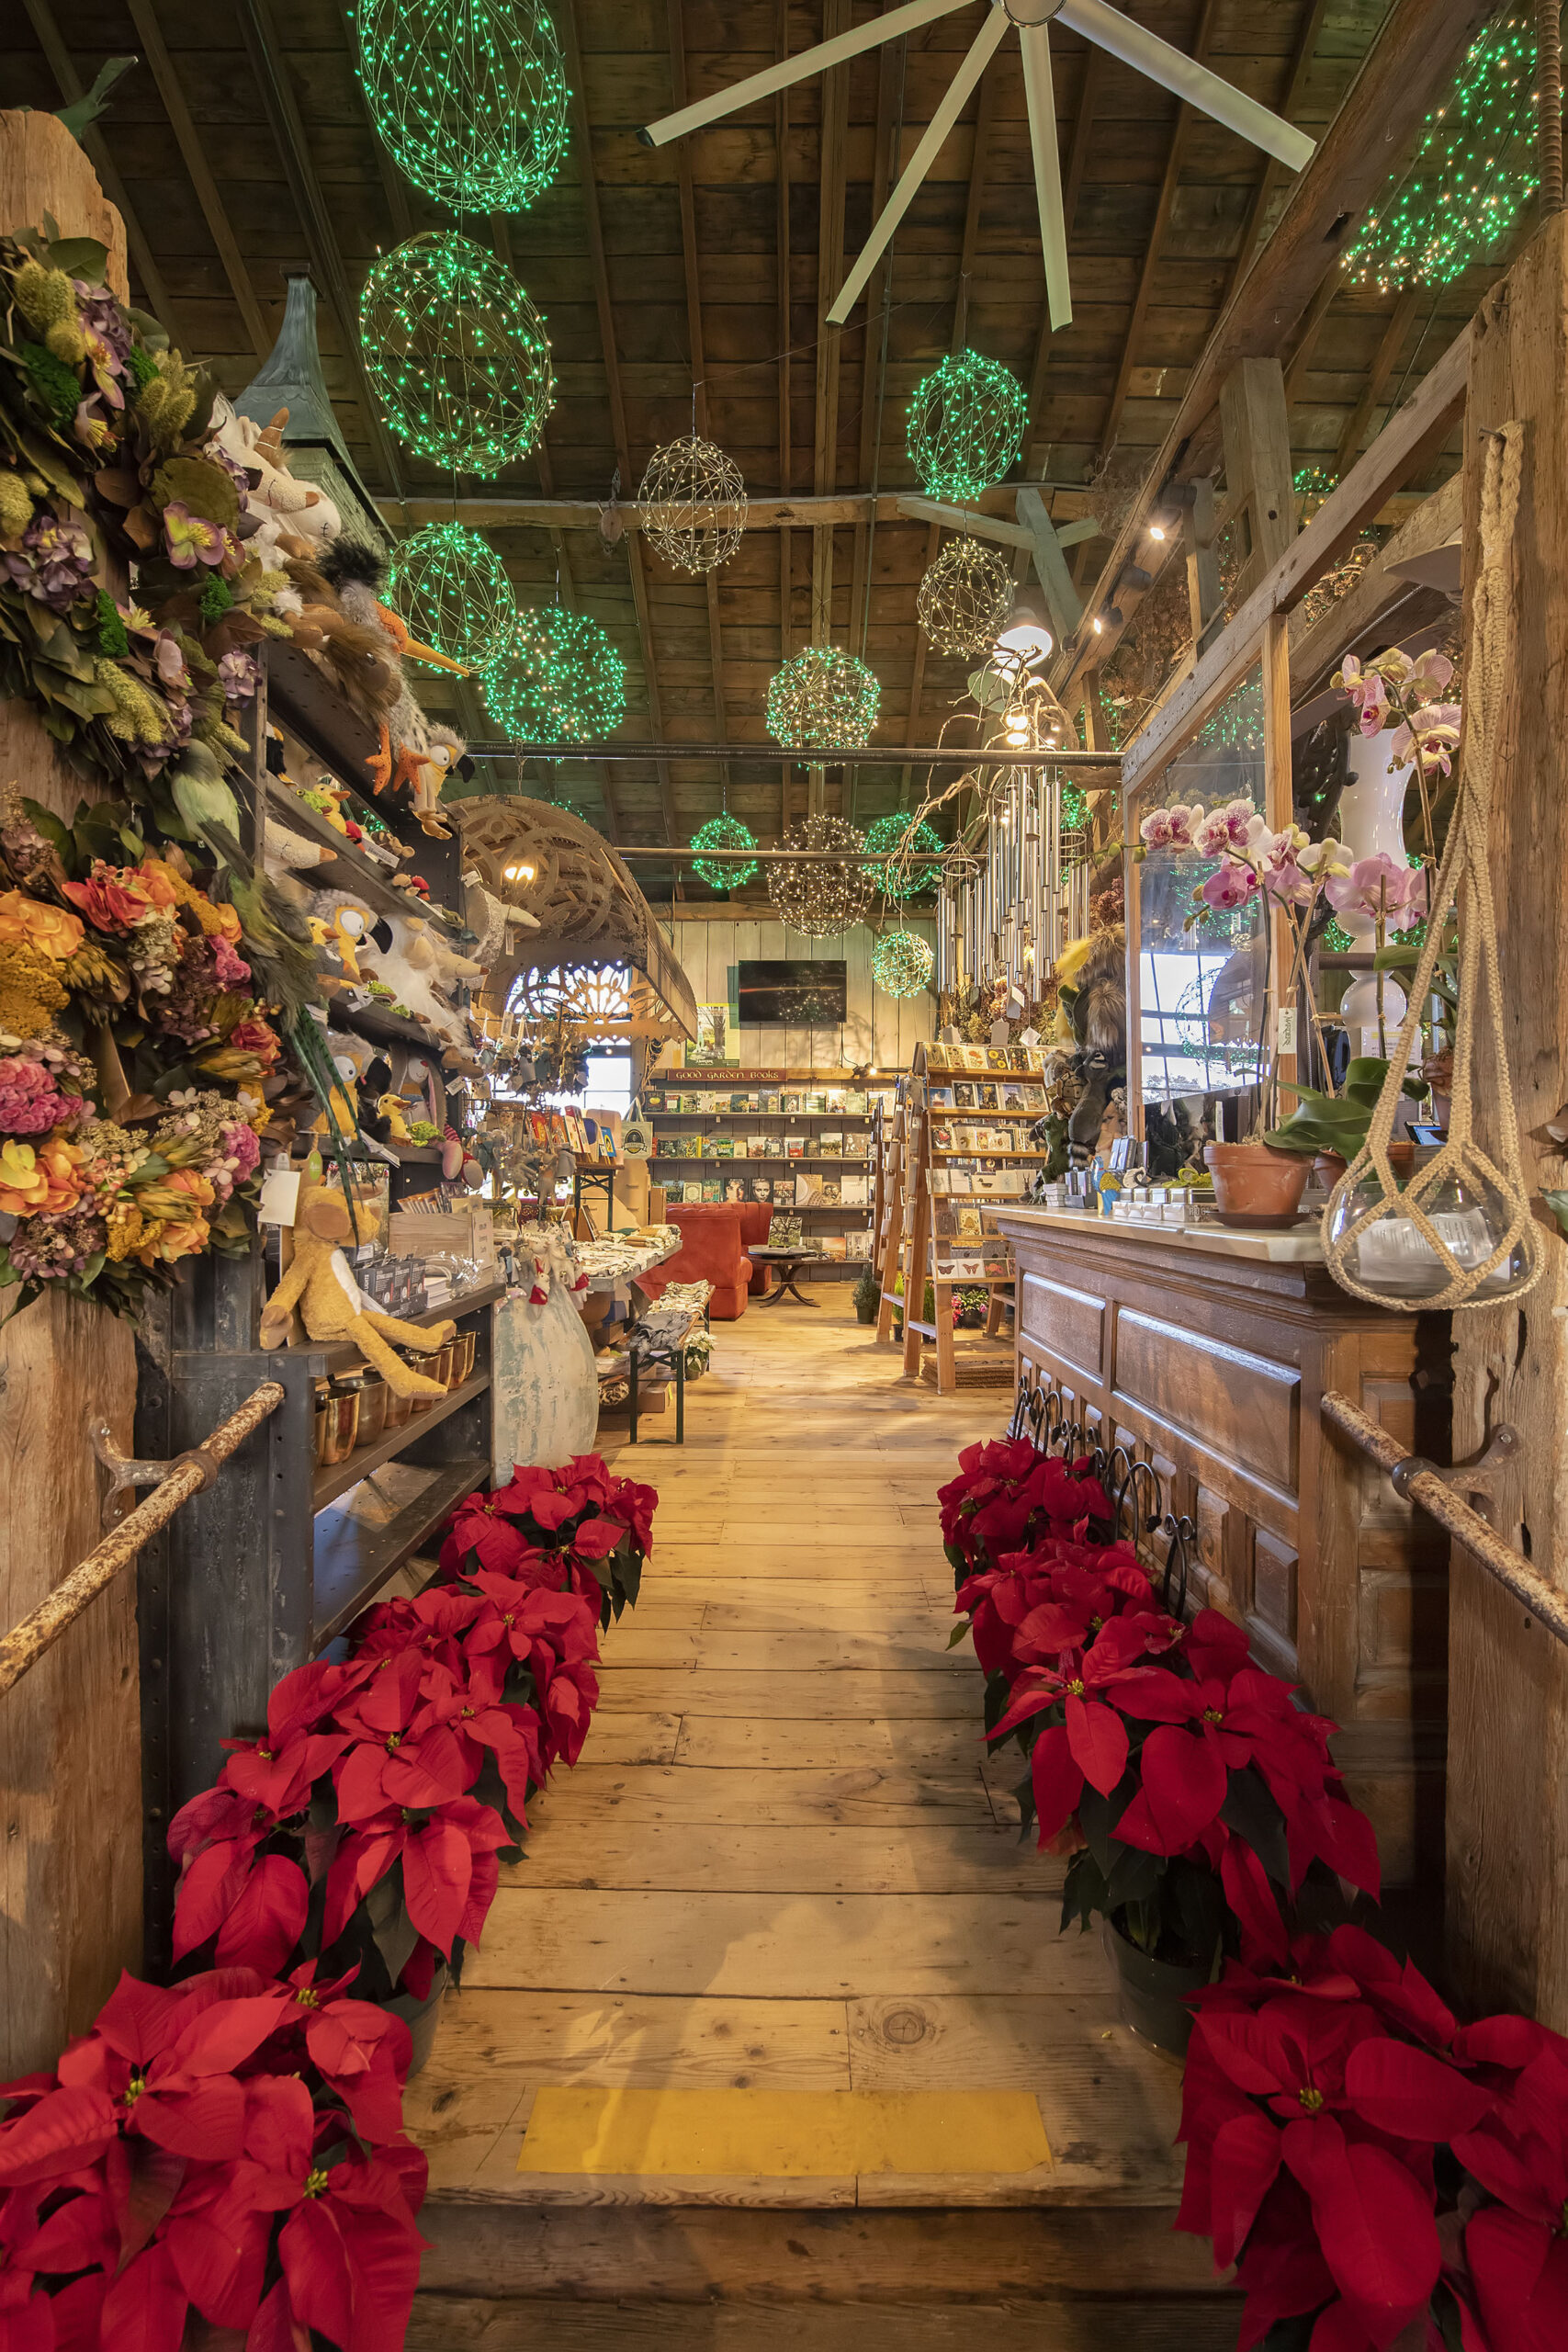 The 2021 Christmas display at Marders Nursery, photographed on November 30th, 2021.  MICHAEL HELLER